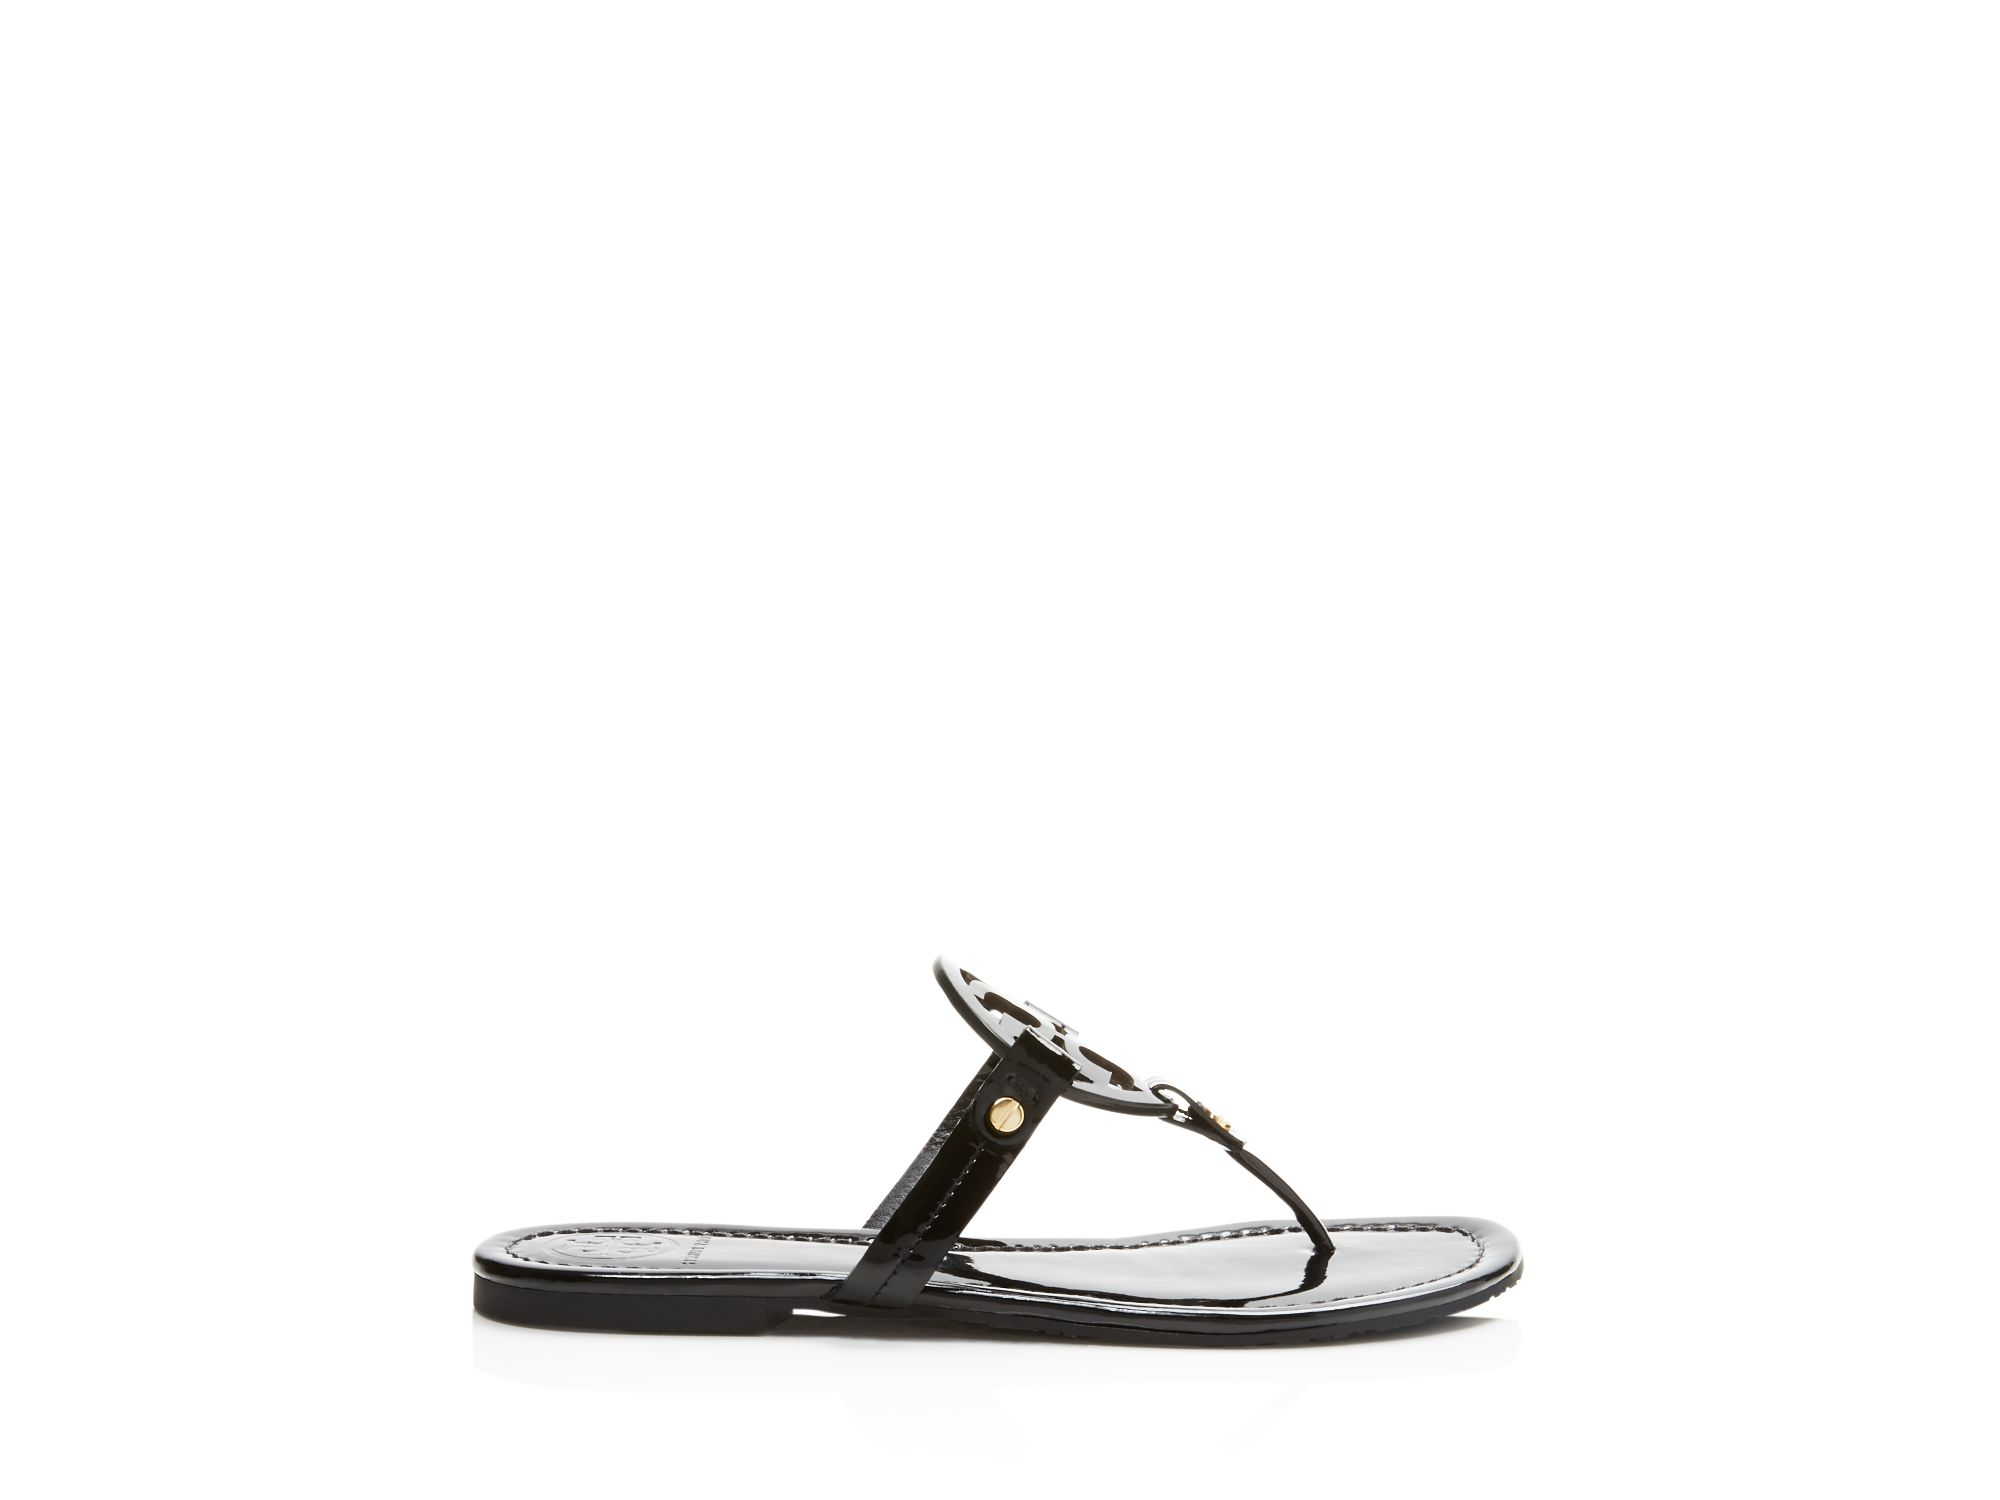 Tory burch Miller Patent Leather Sandals in Black | Lyst